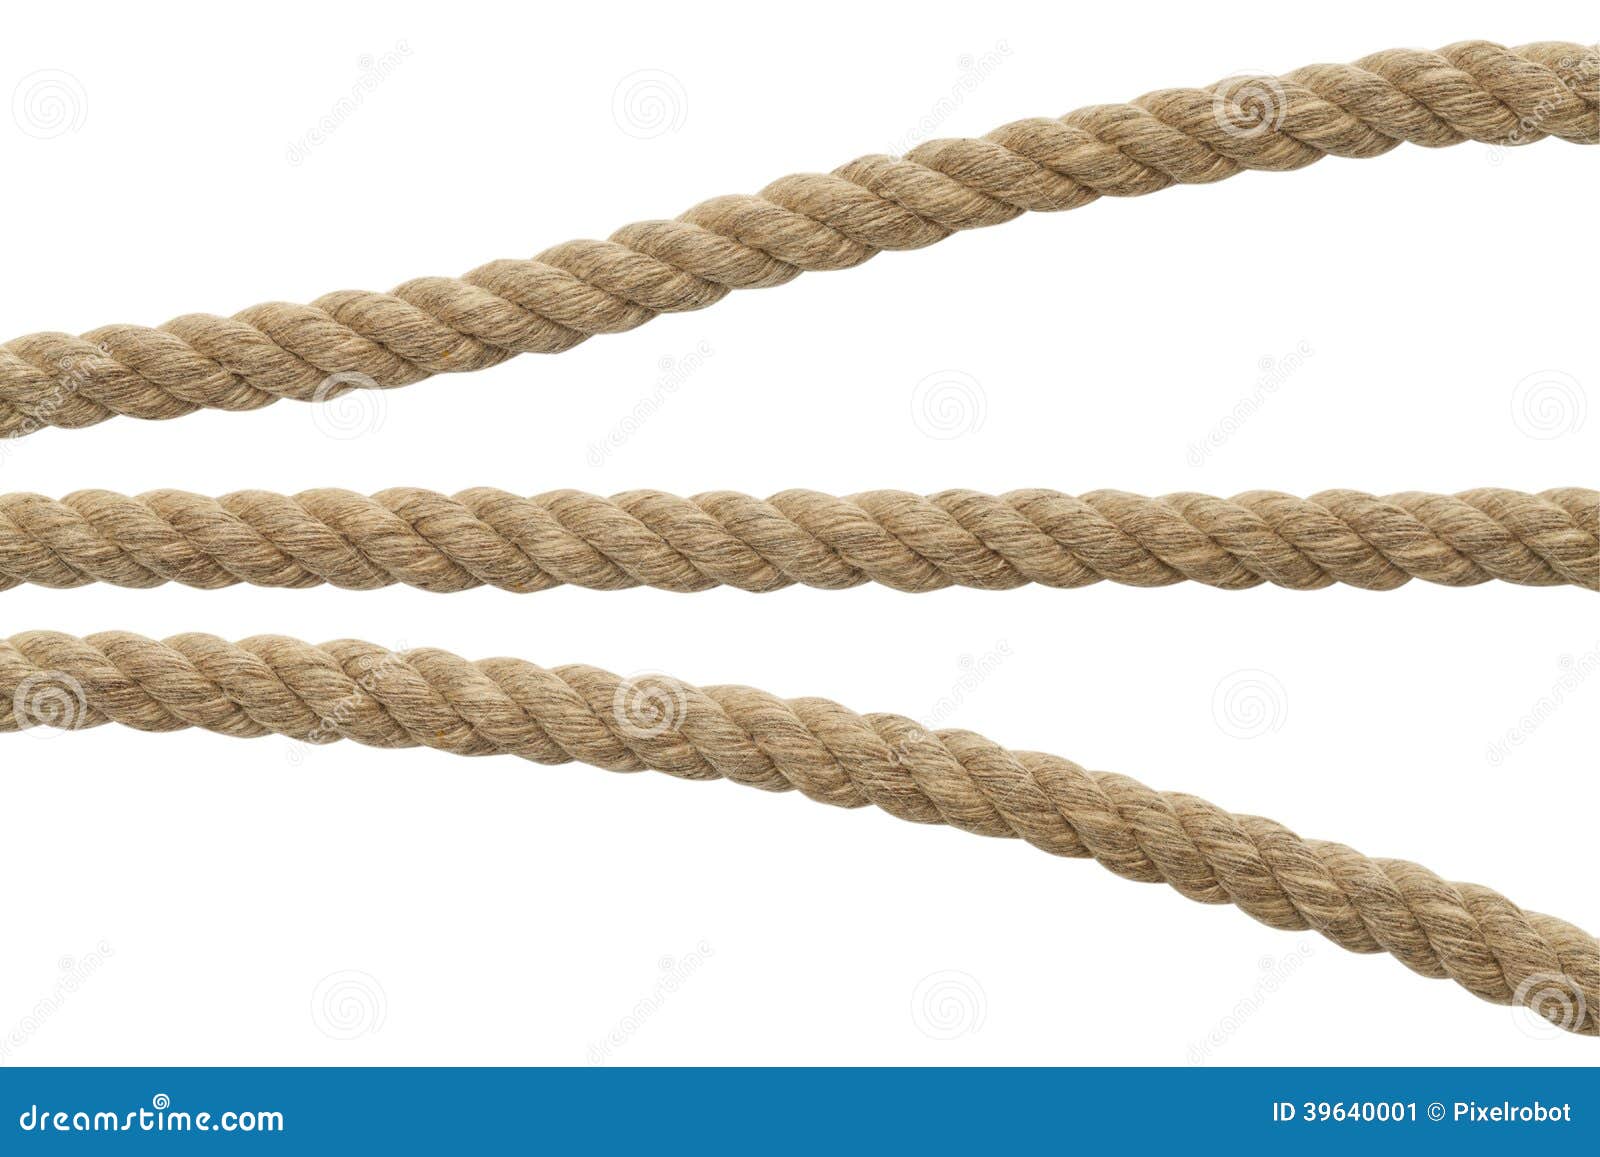 Rope Parts stock image. Image of copy, entertainment - 39640001